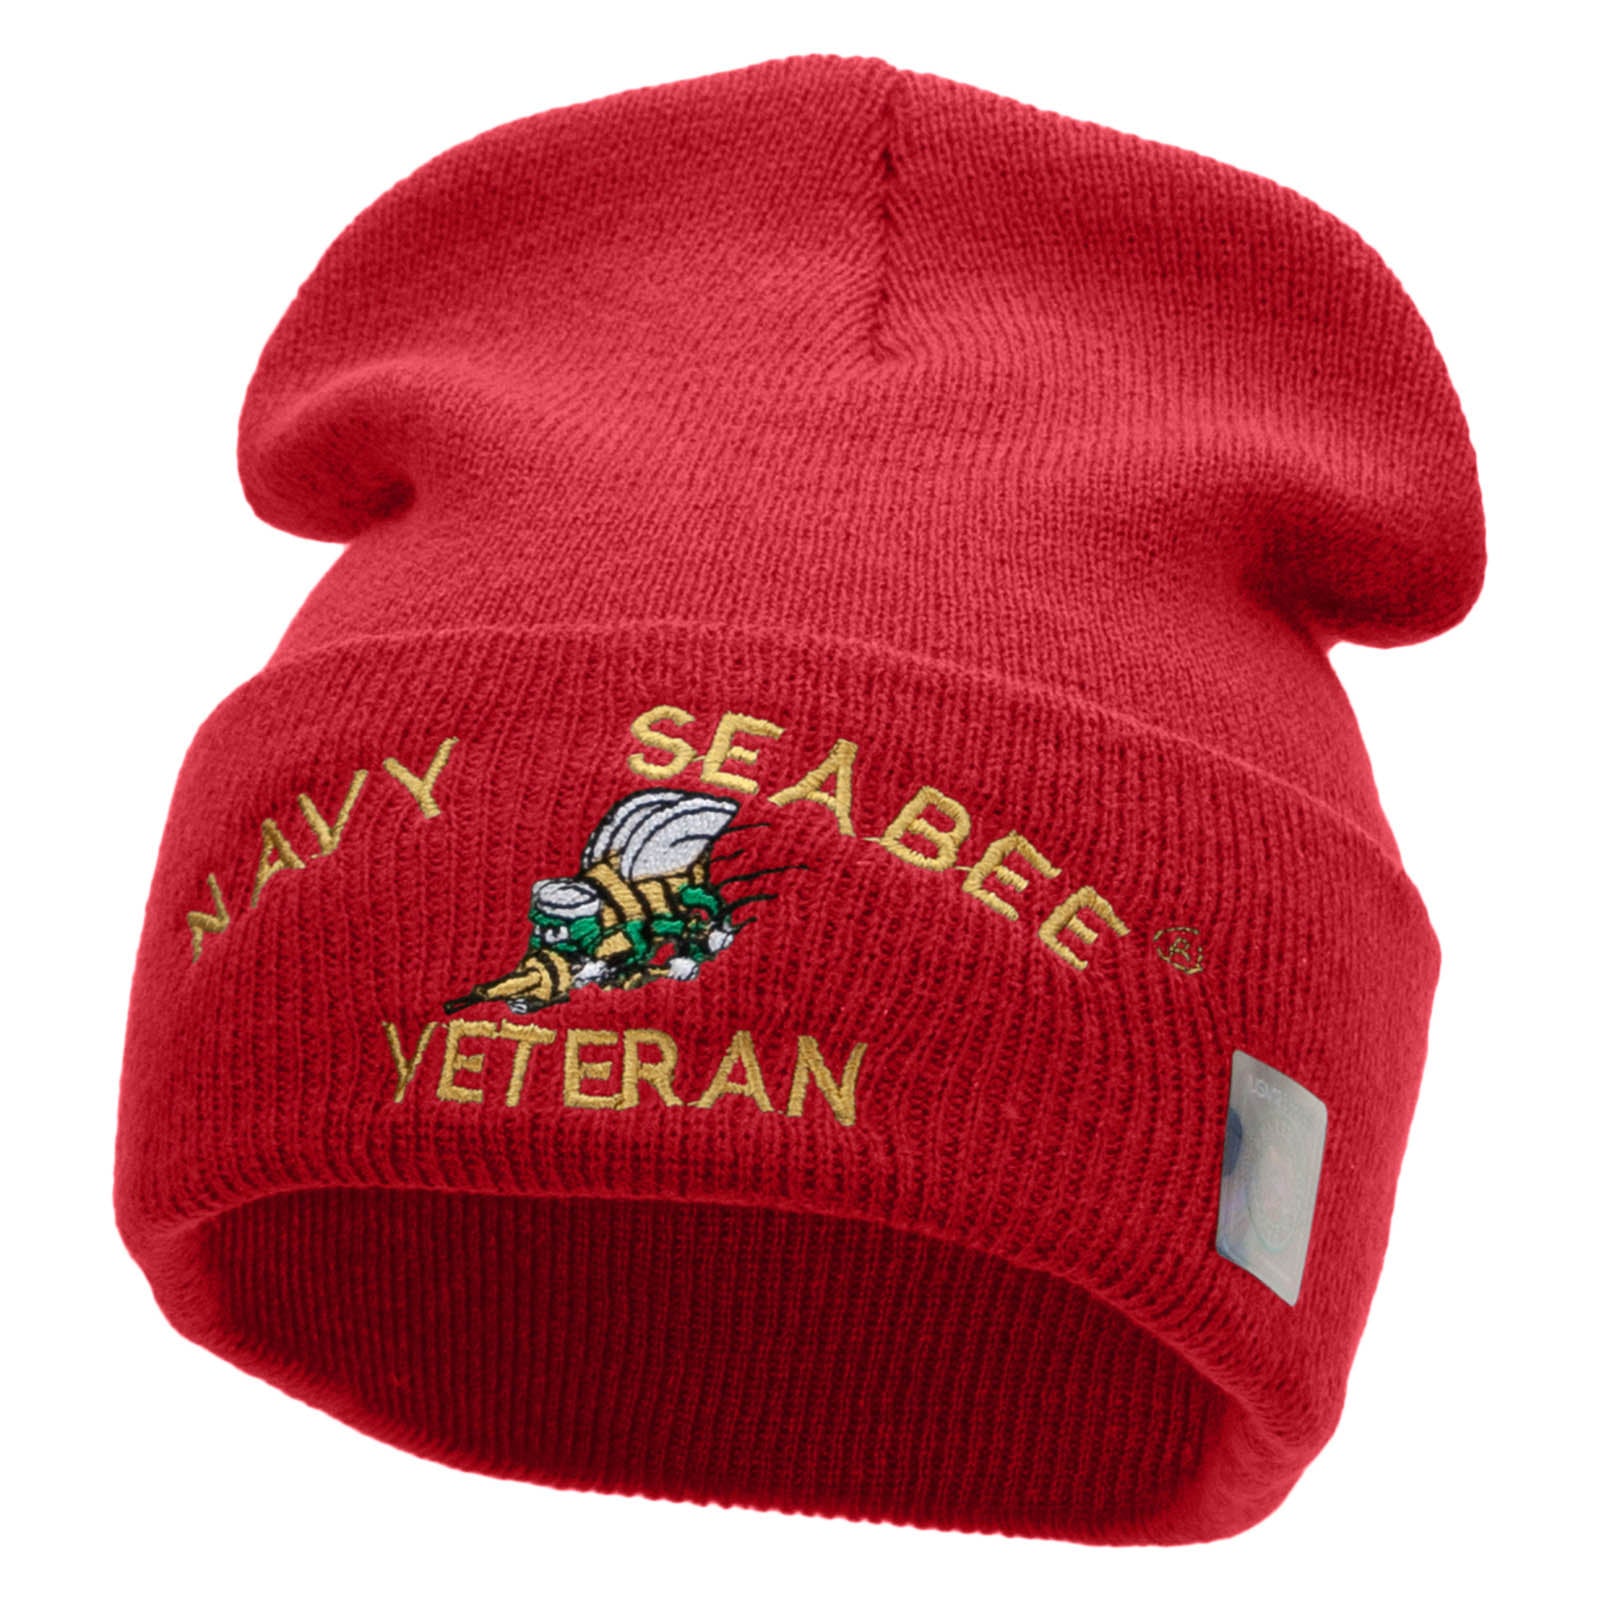 Licensed US Navy Seabee Veteran Military Embroidered Long Beanie Made in USA - Red OSFM